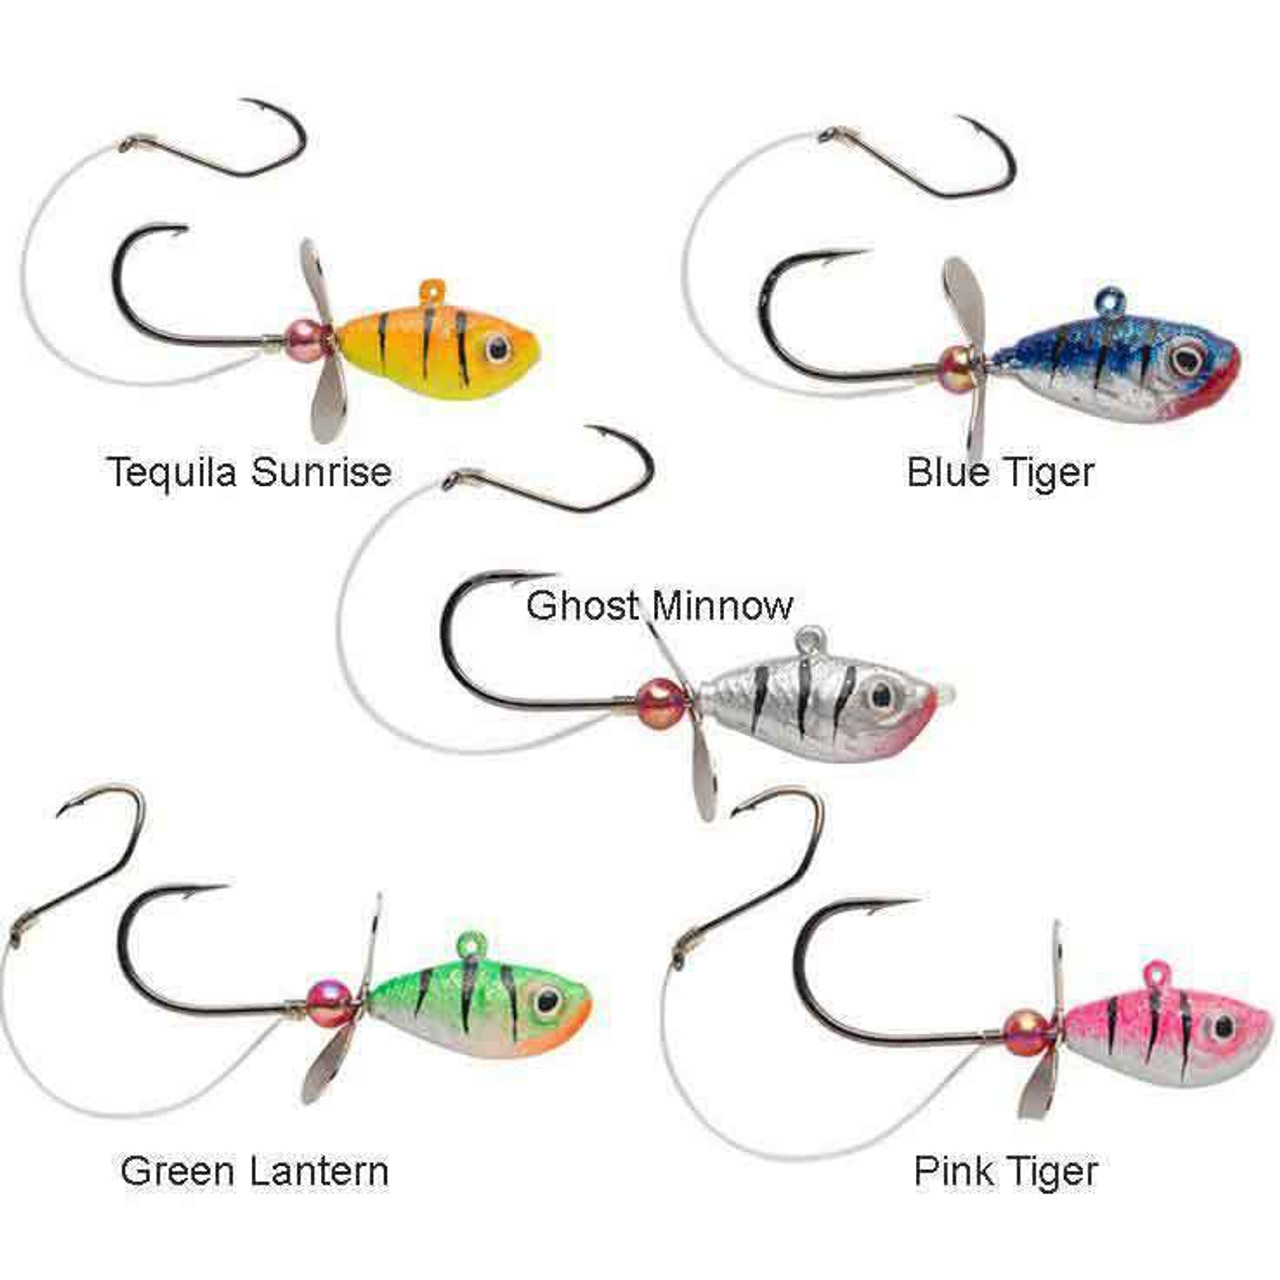 https://cdn11.bigcommerce.com/s-i6ykqoitnd/images/stencil/1280x1280/products/10518/53477/spectrum-lures-whistle-pigs-metal-lures-spectrum-lures-12oz-ghost-minnow-431544__57681.1639601073.jpg?c=1&imbypass=on